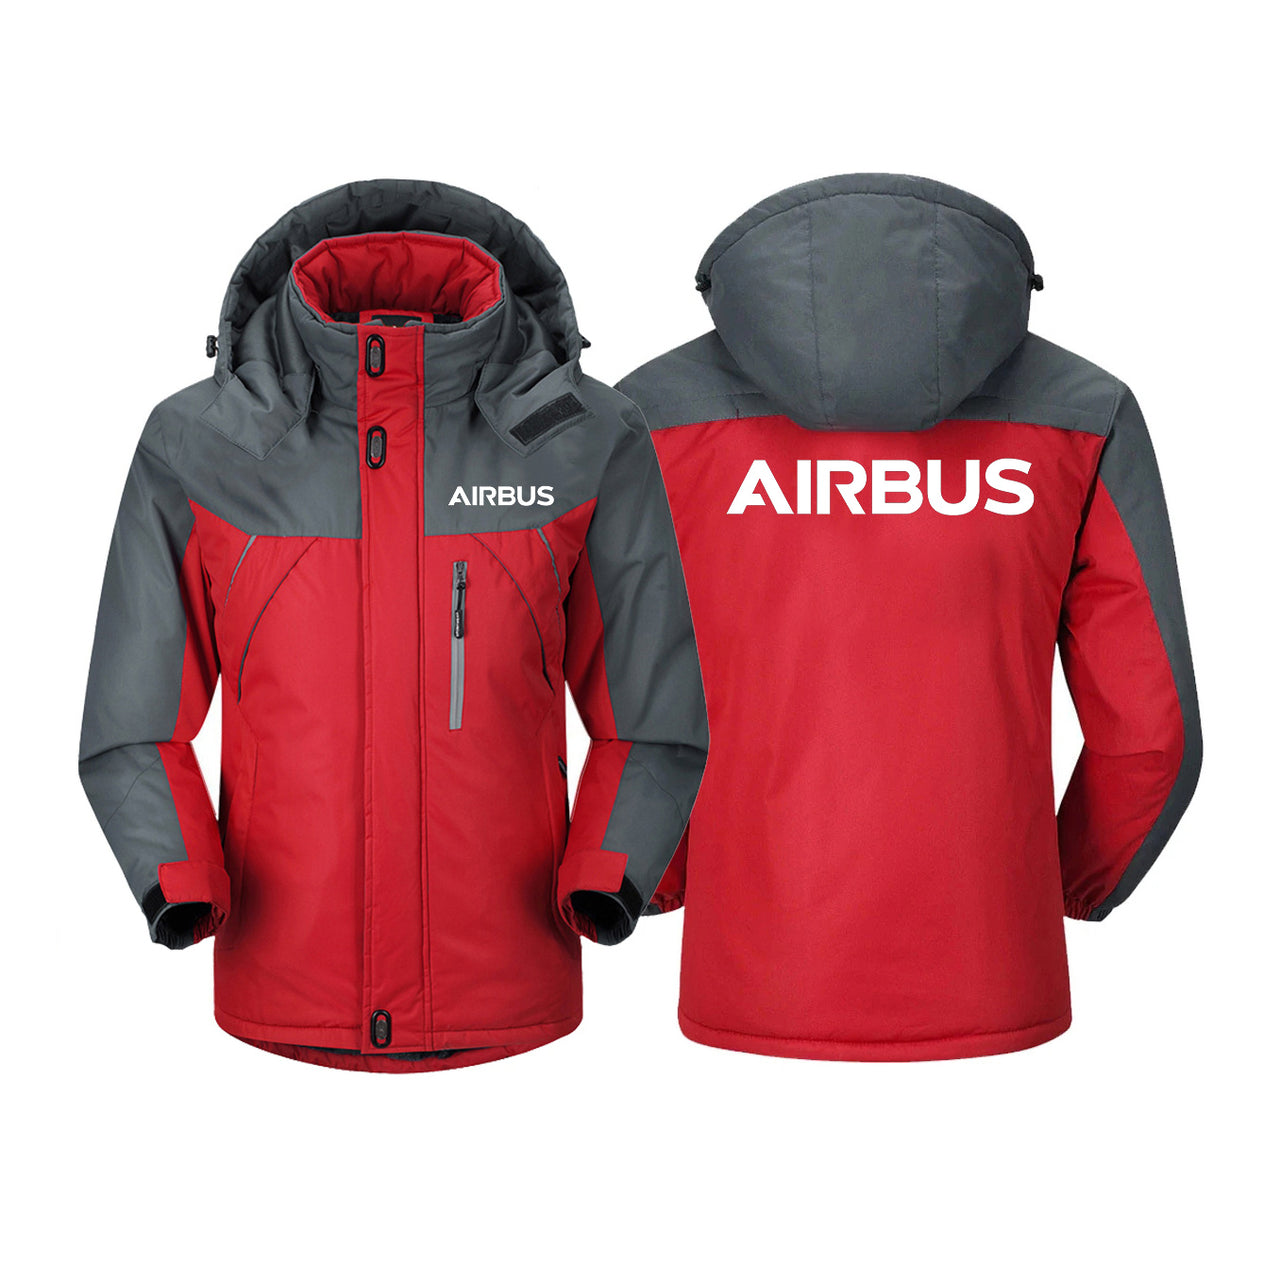 Airbus & Text Designed Thick Winter Jackets